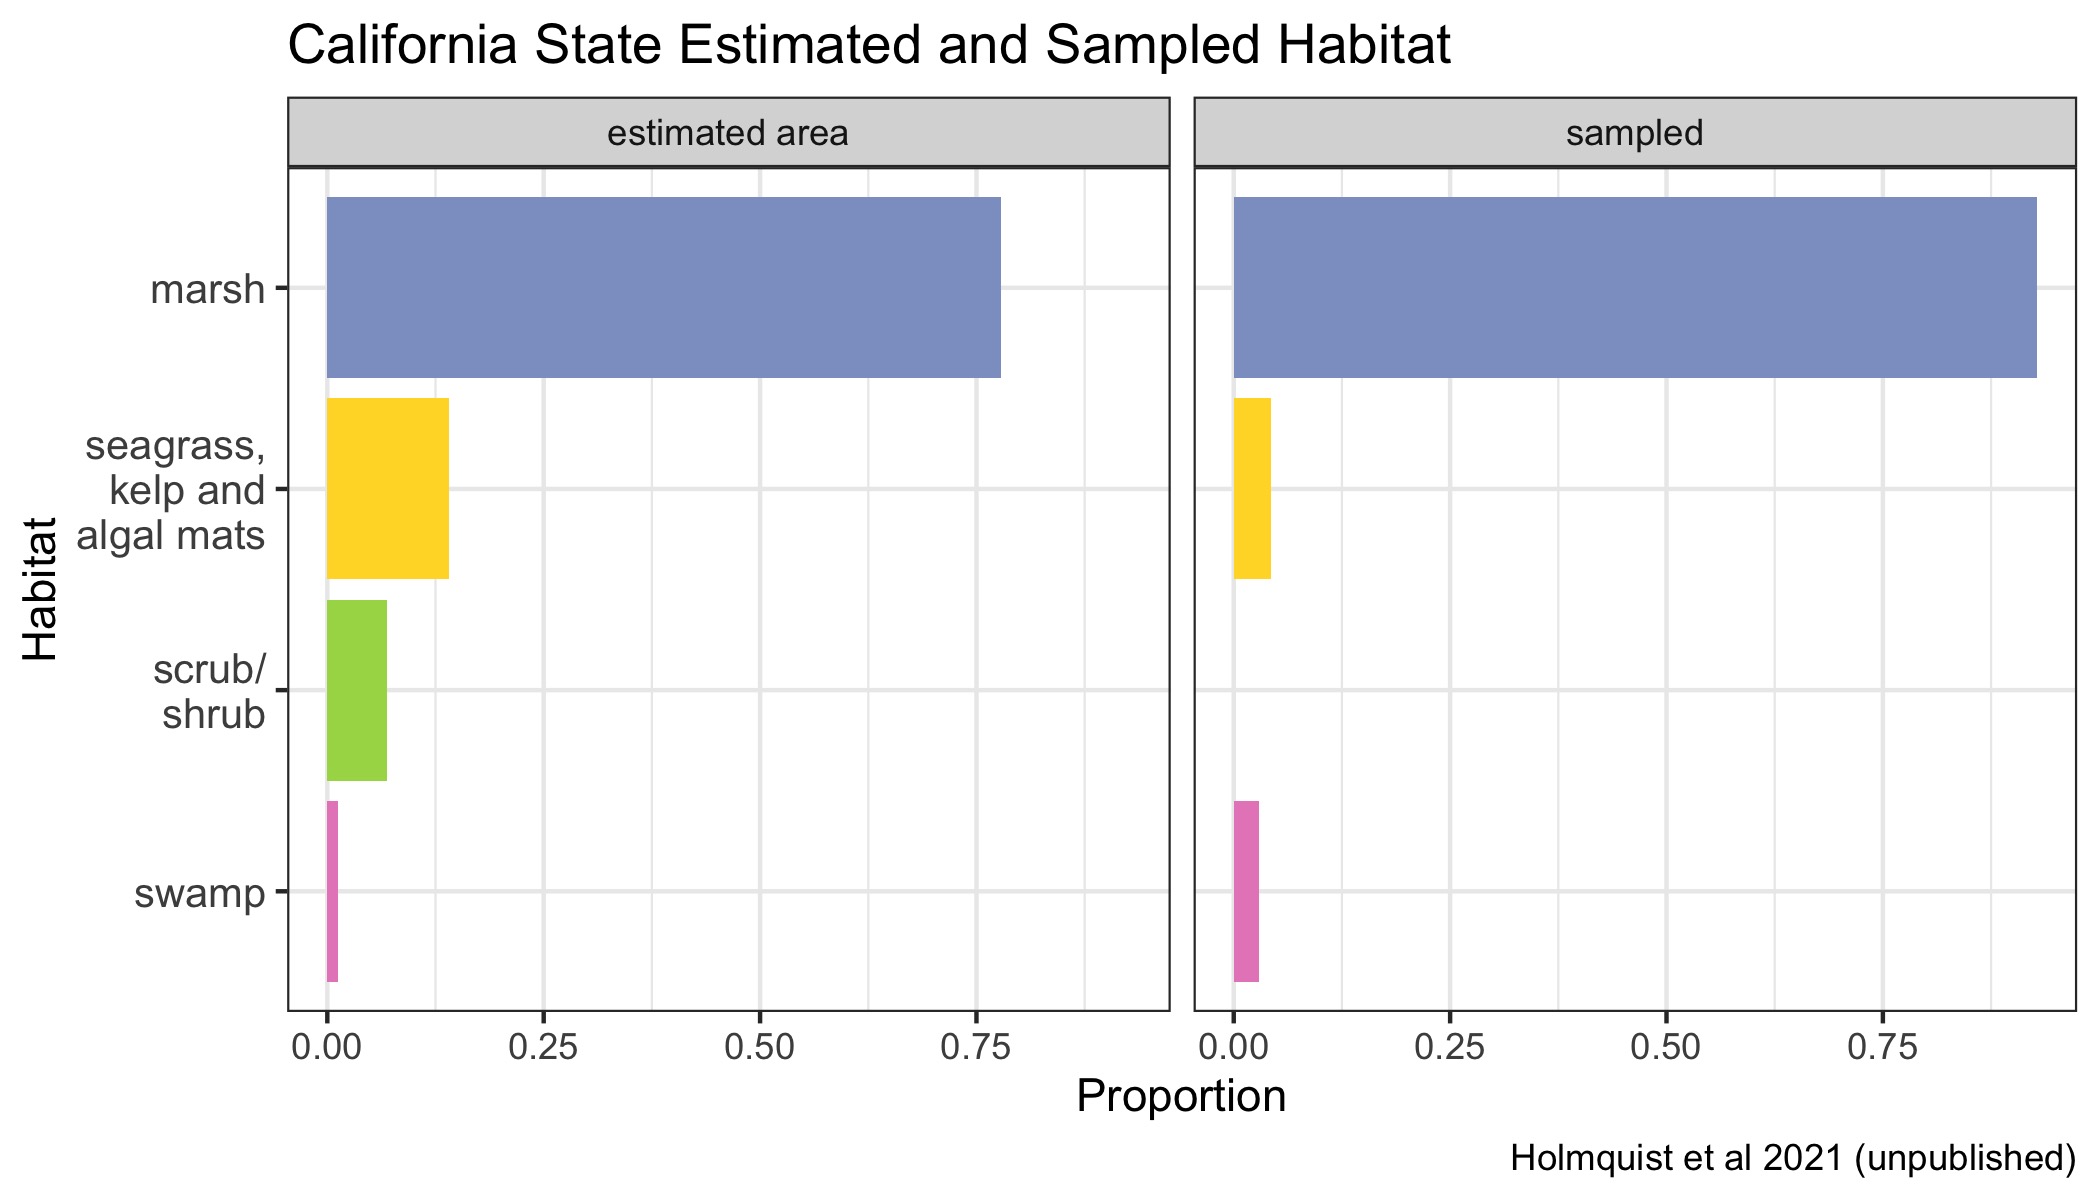 Proportions of various Blue Carbon habitats across California state represented in the dataset in proportion to their estimated area. Seagrasses, kelp beds and algal mats are all combined into a single category, because they are combined in the underlying mapping products.